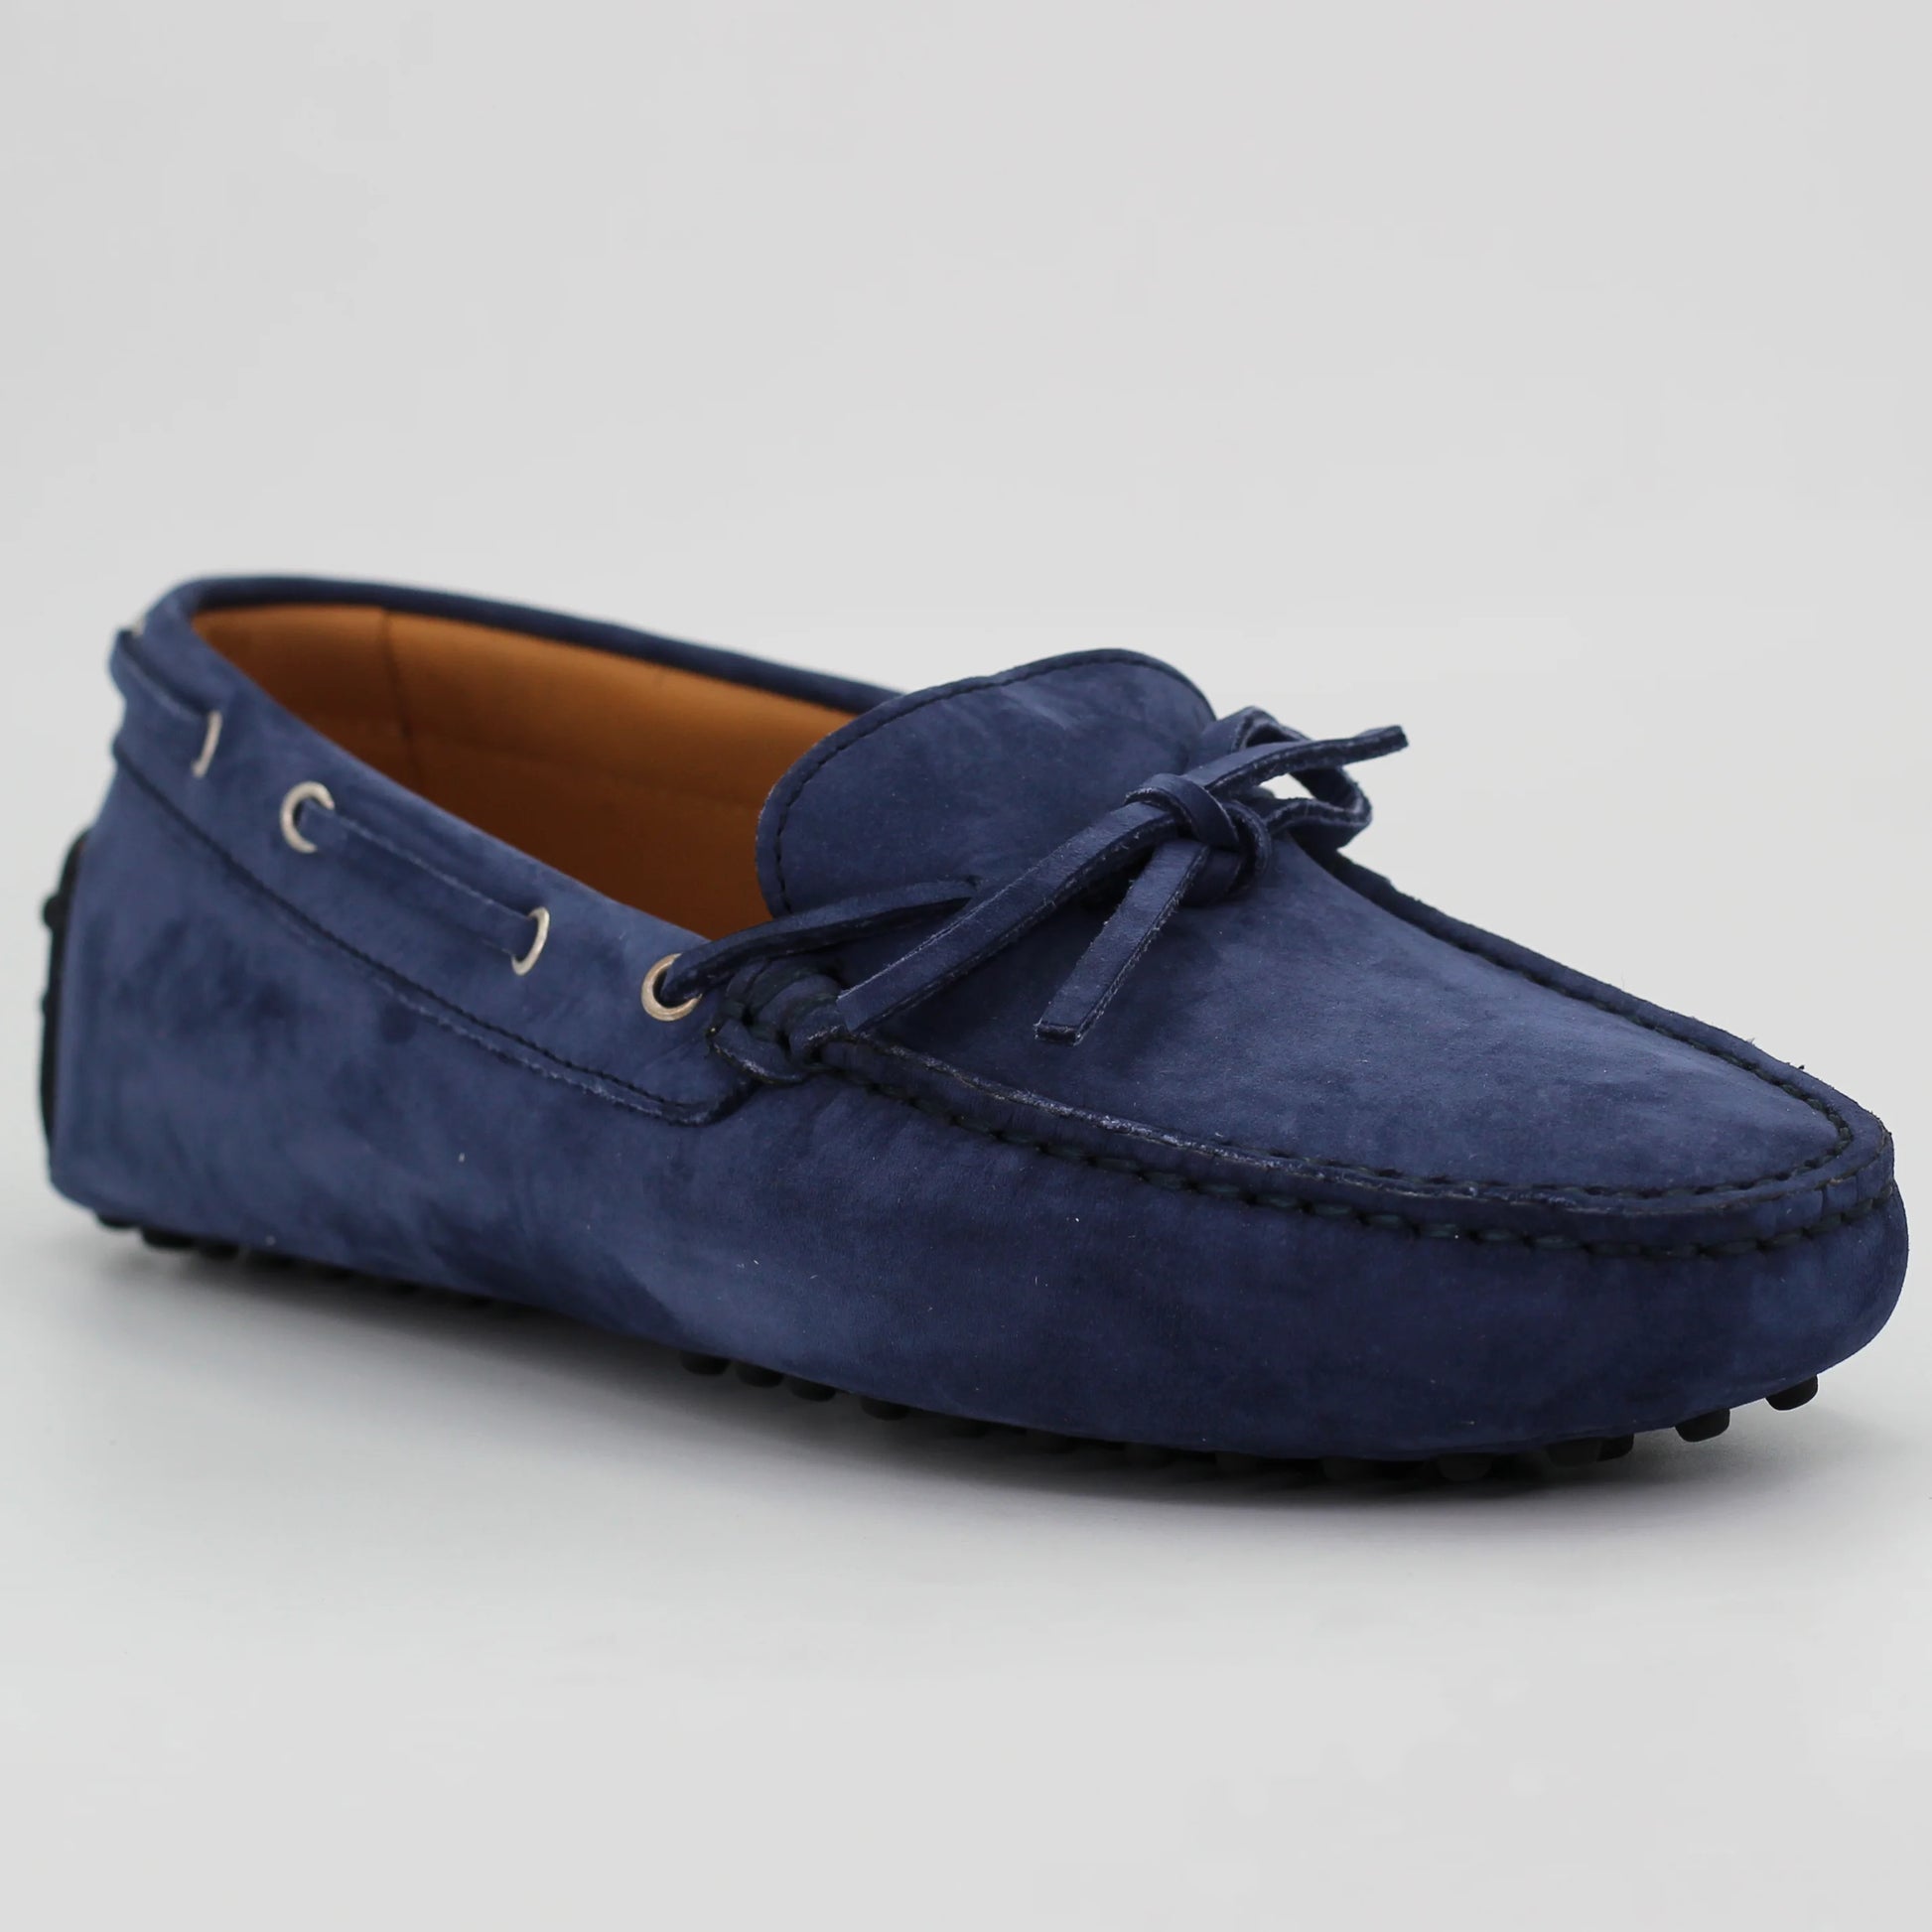 Shop Handmade Italian Leather suede moccasin in blue (COND04011) or browse our range of hand-made Italian shoes in leather or suede in-store at Aliverti Cape Town, or shop online. We deliver in South Africa & offer multiple payment plans as well as accept multiple safe & secure payment methods.